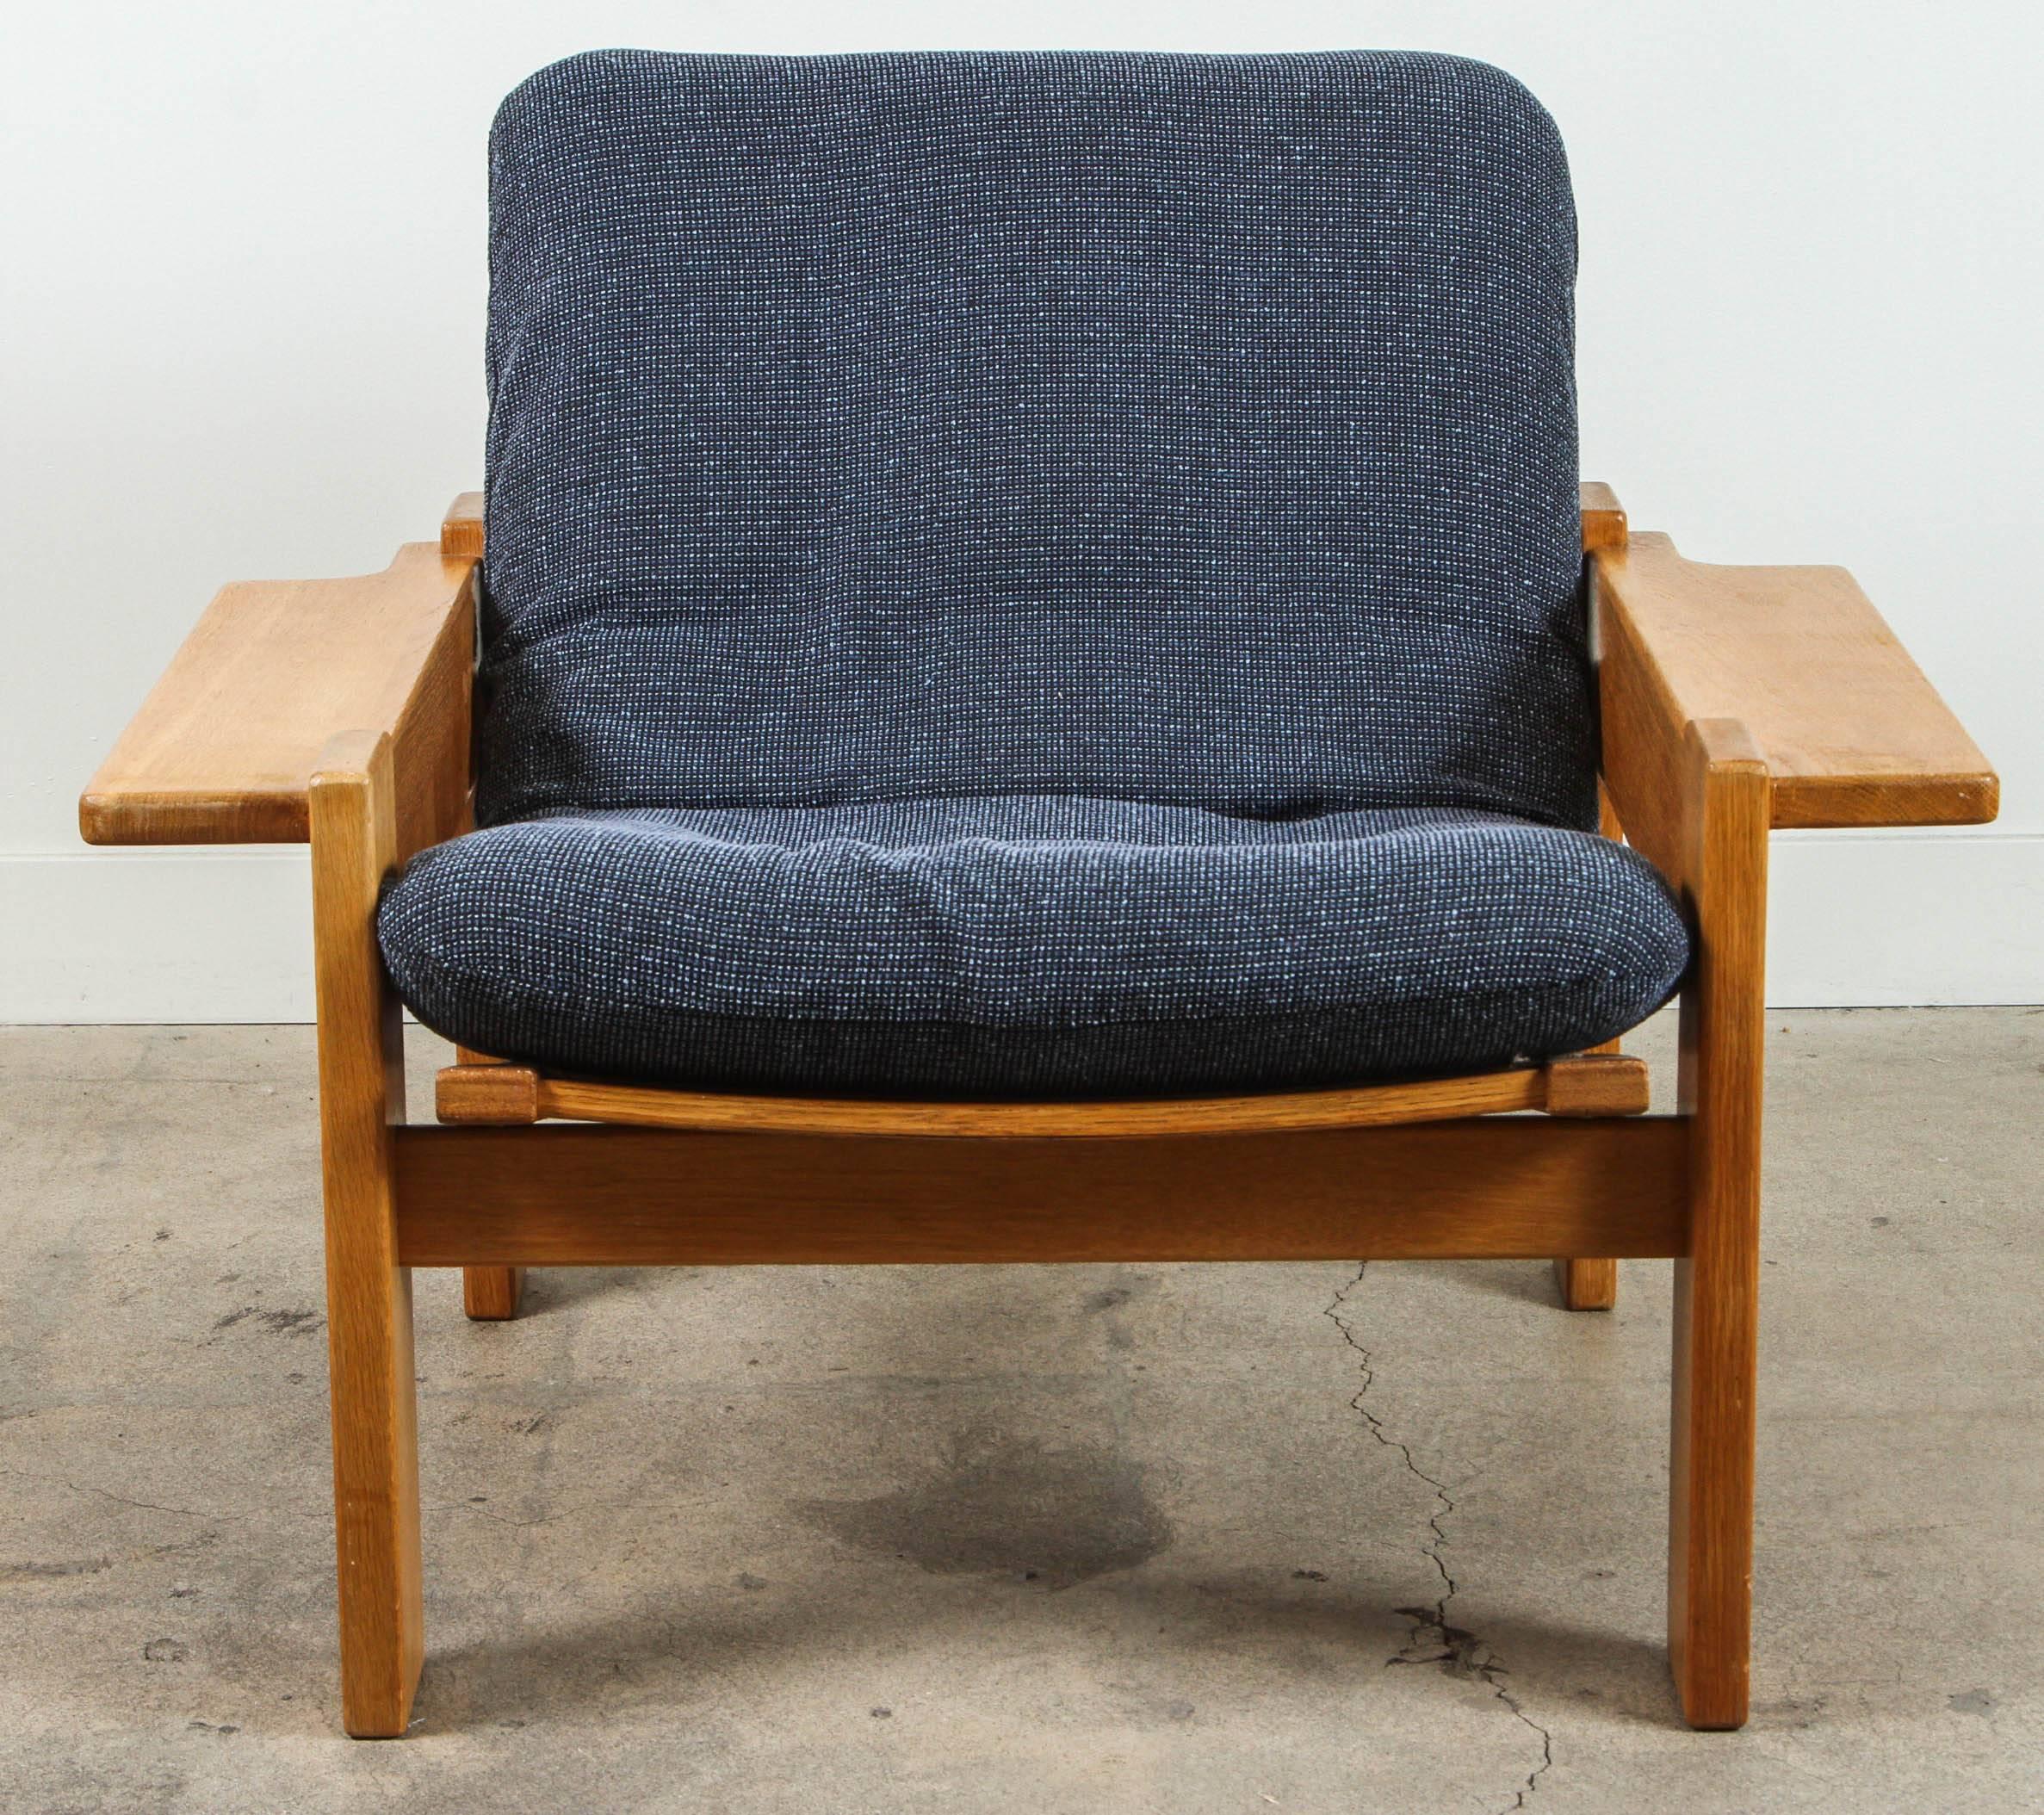 Pair of solid oak armchairs by Yngve Ekstrom for Swedese.